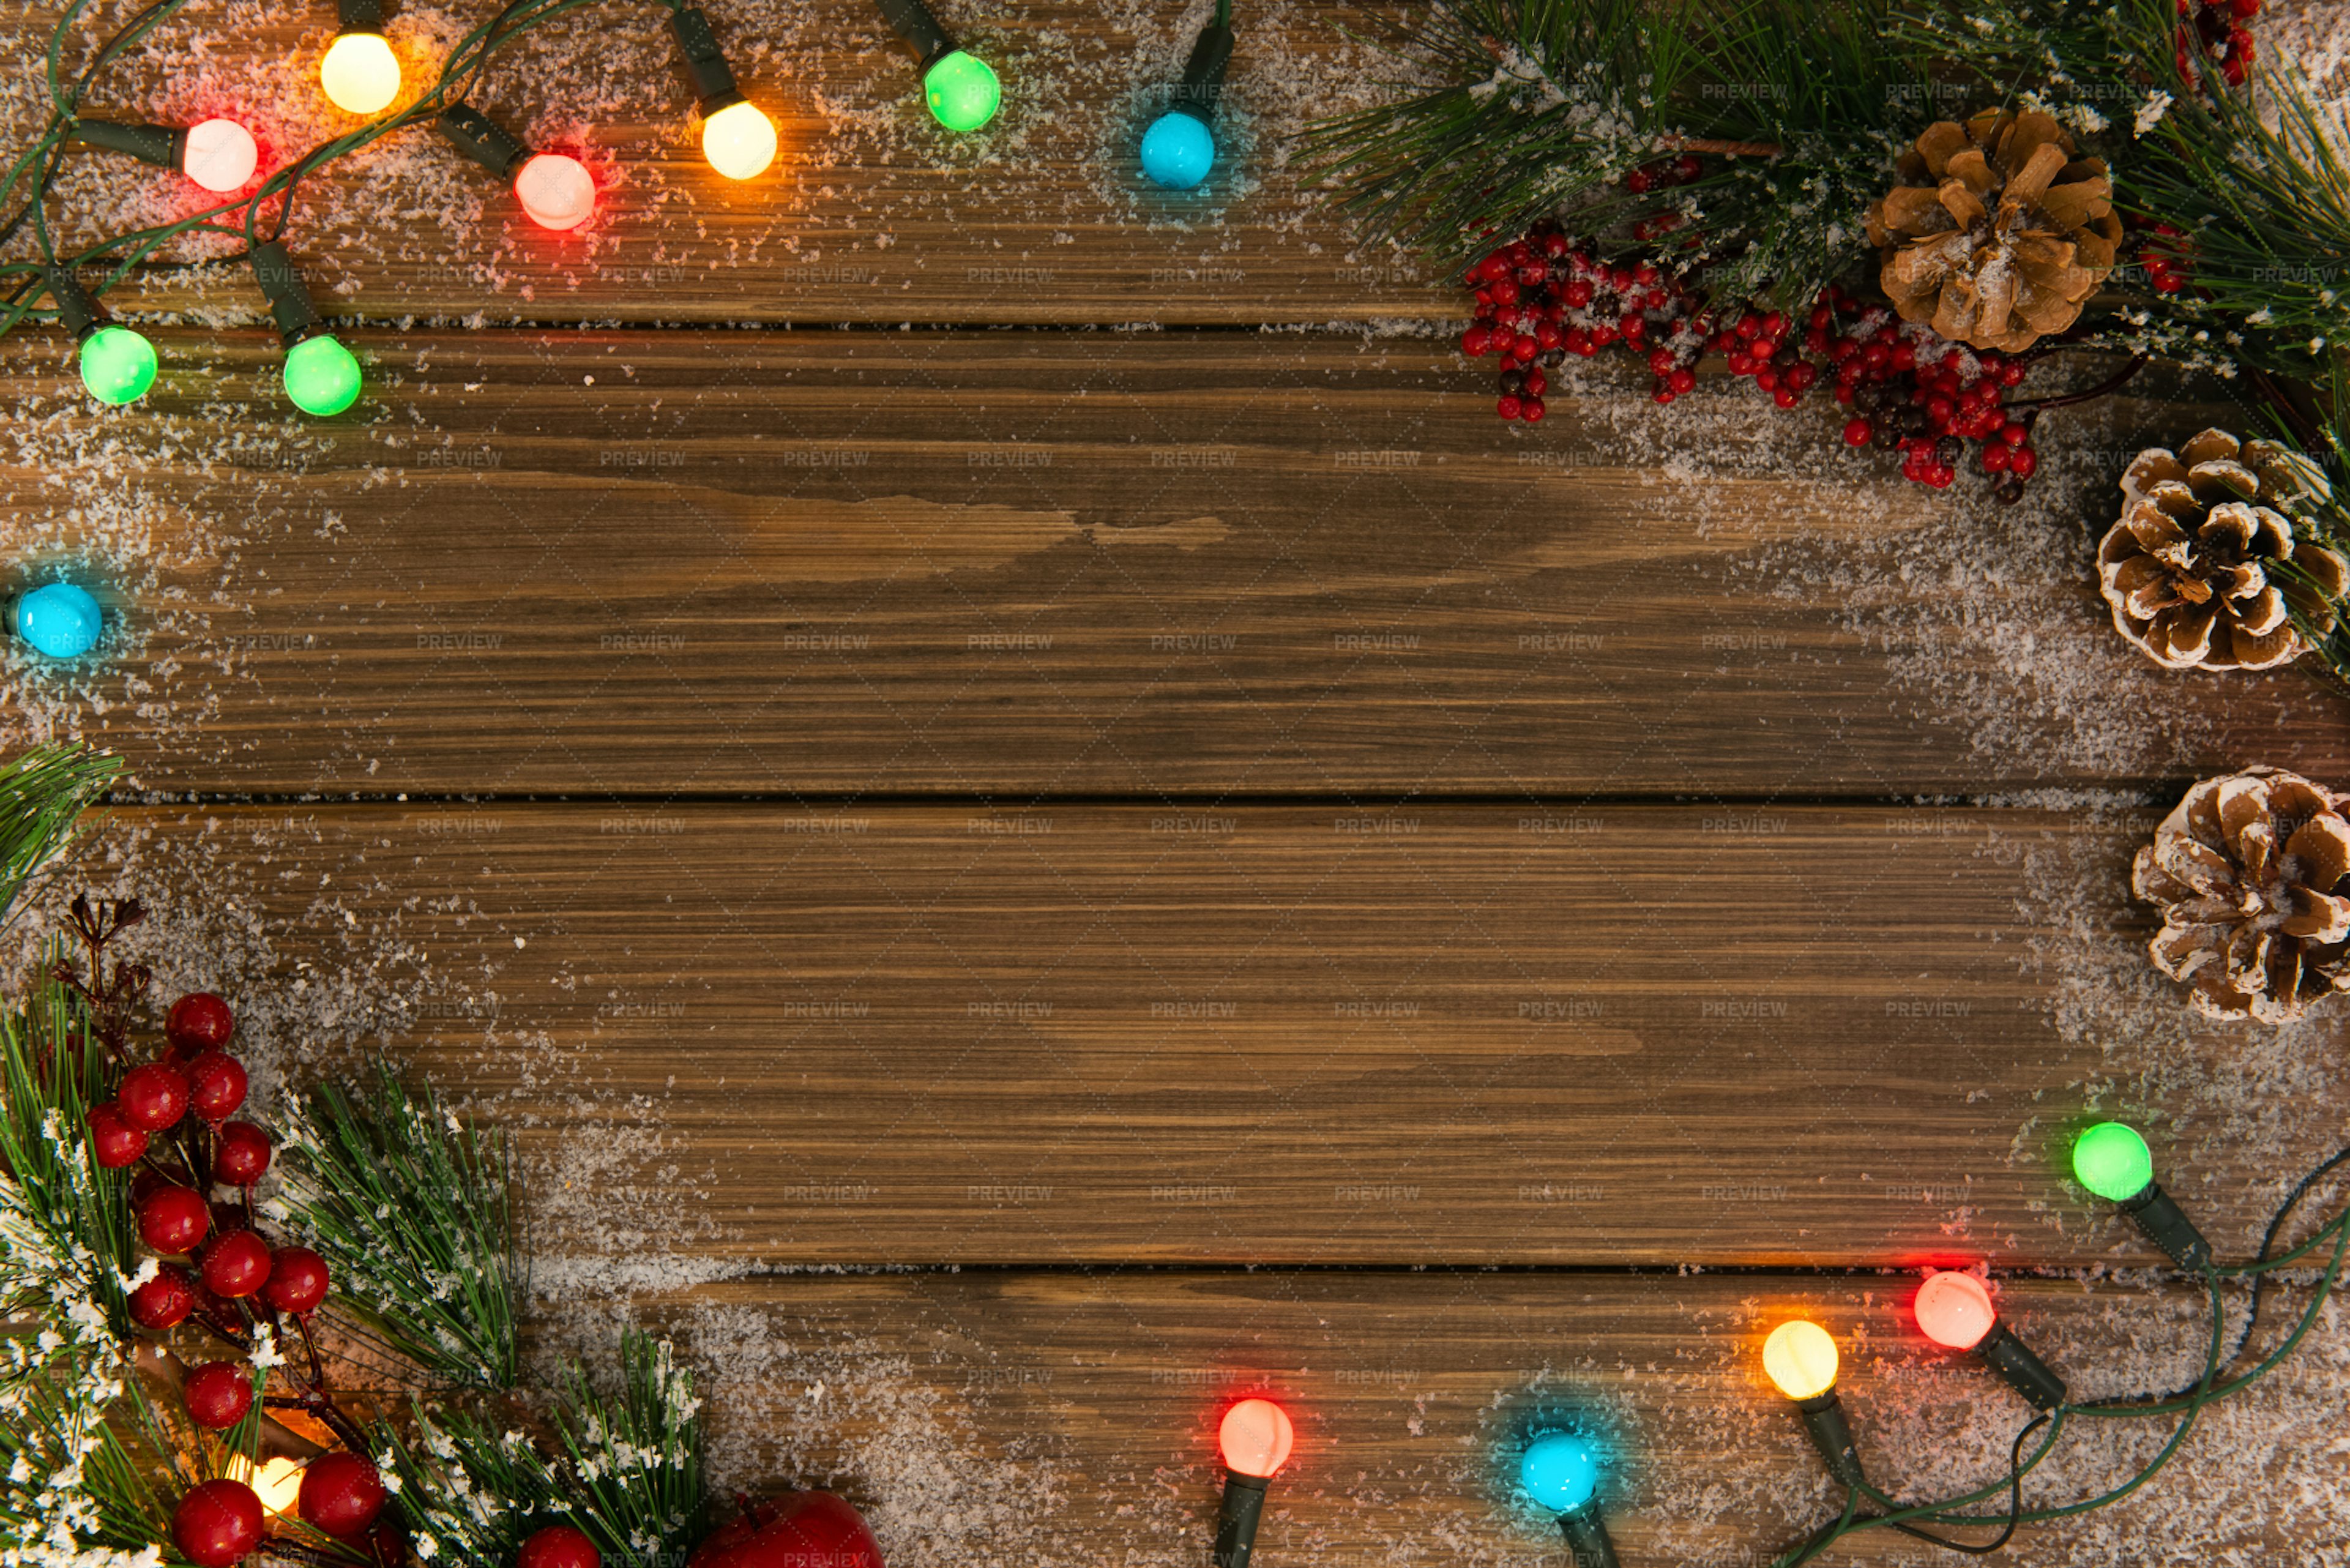 Christmas Wooden Background - Stock Photos | Motion Array